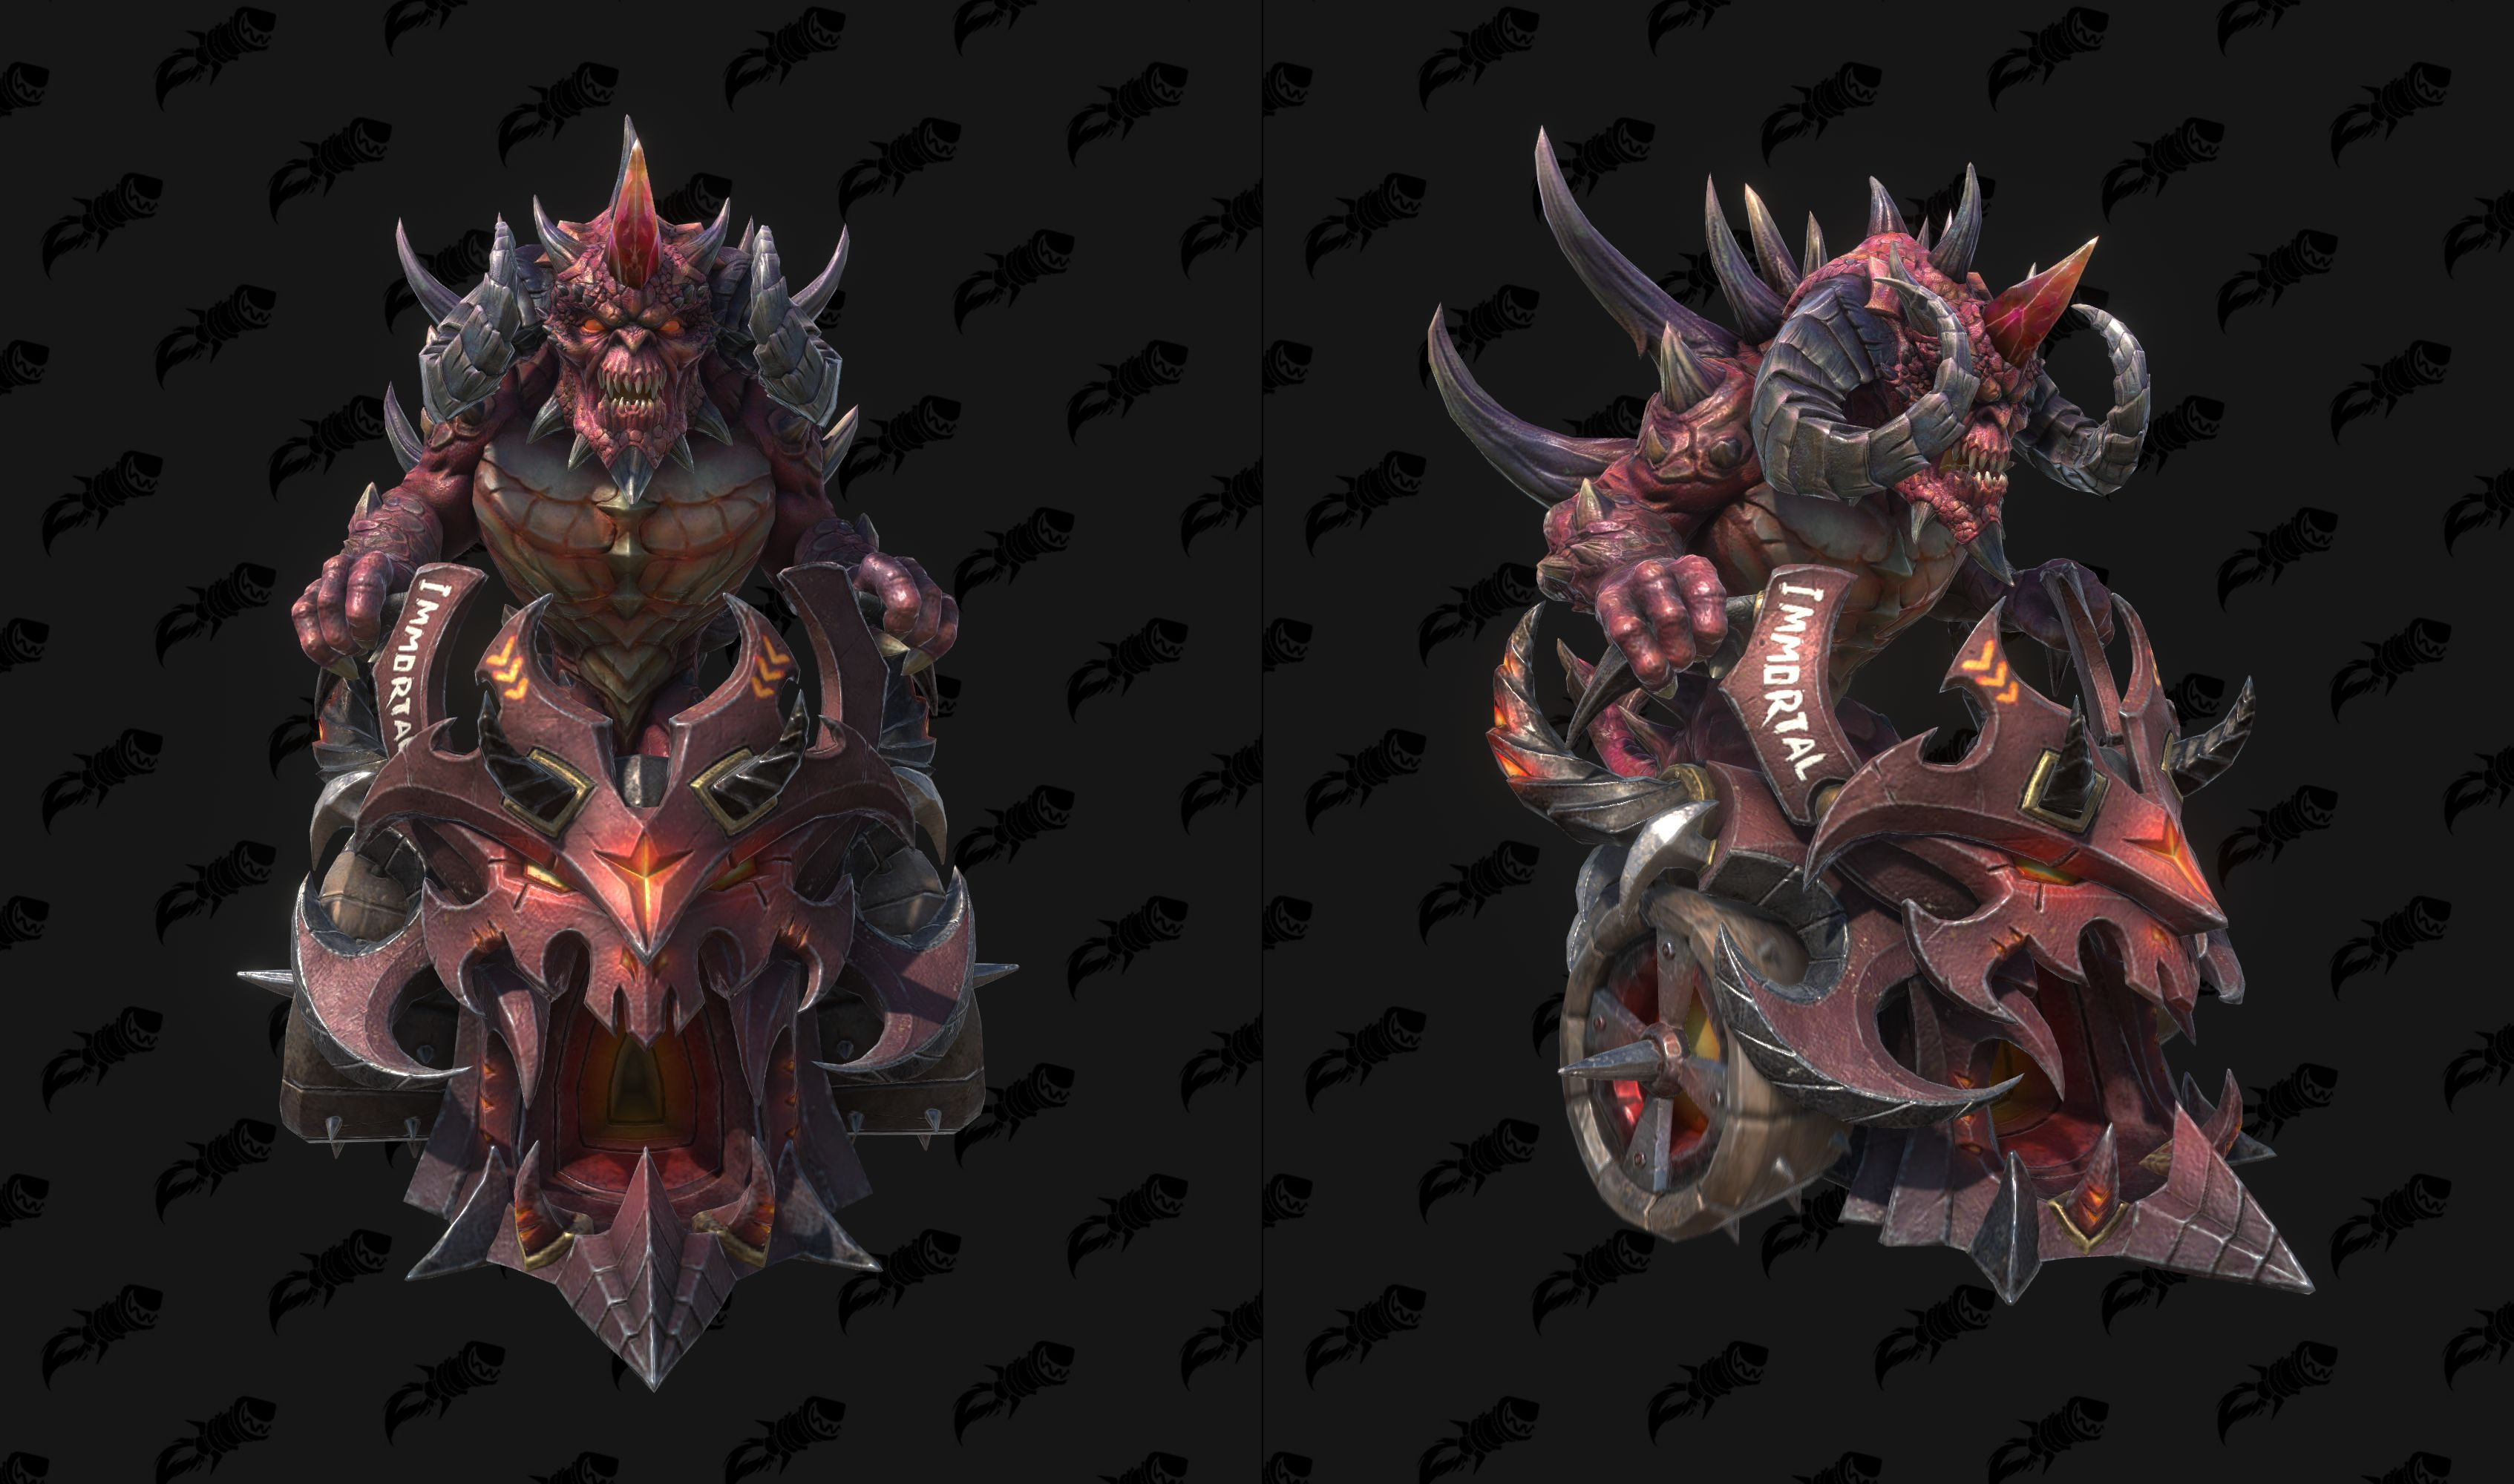 Warcraft Iii Reforged Models Diablo Immortal And Lich Cars For Azeroth Grand Prix Wowhead新闻 魔兽世界